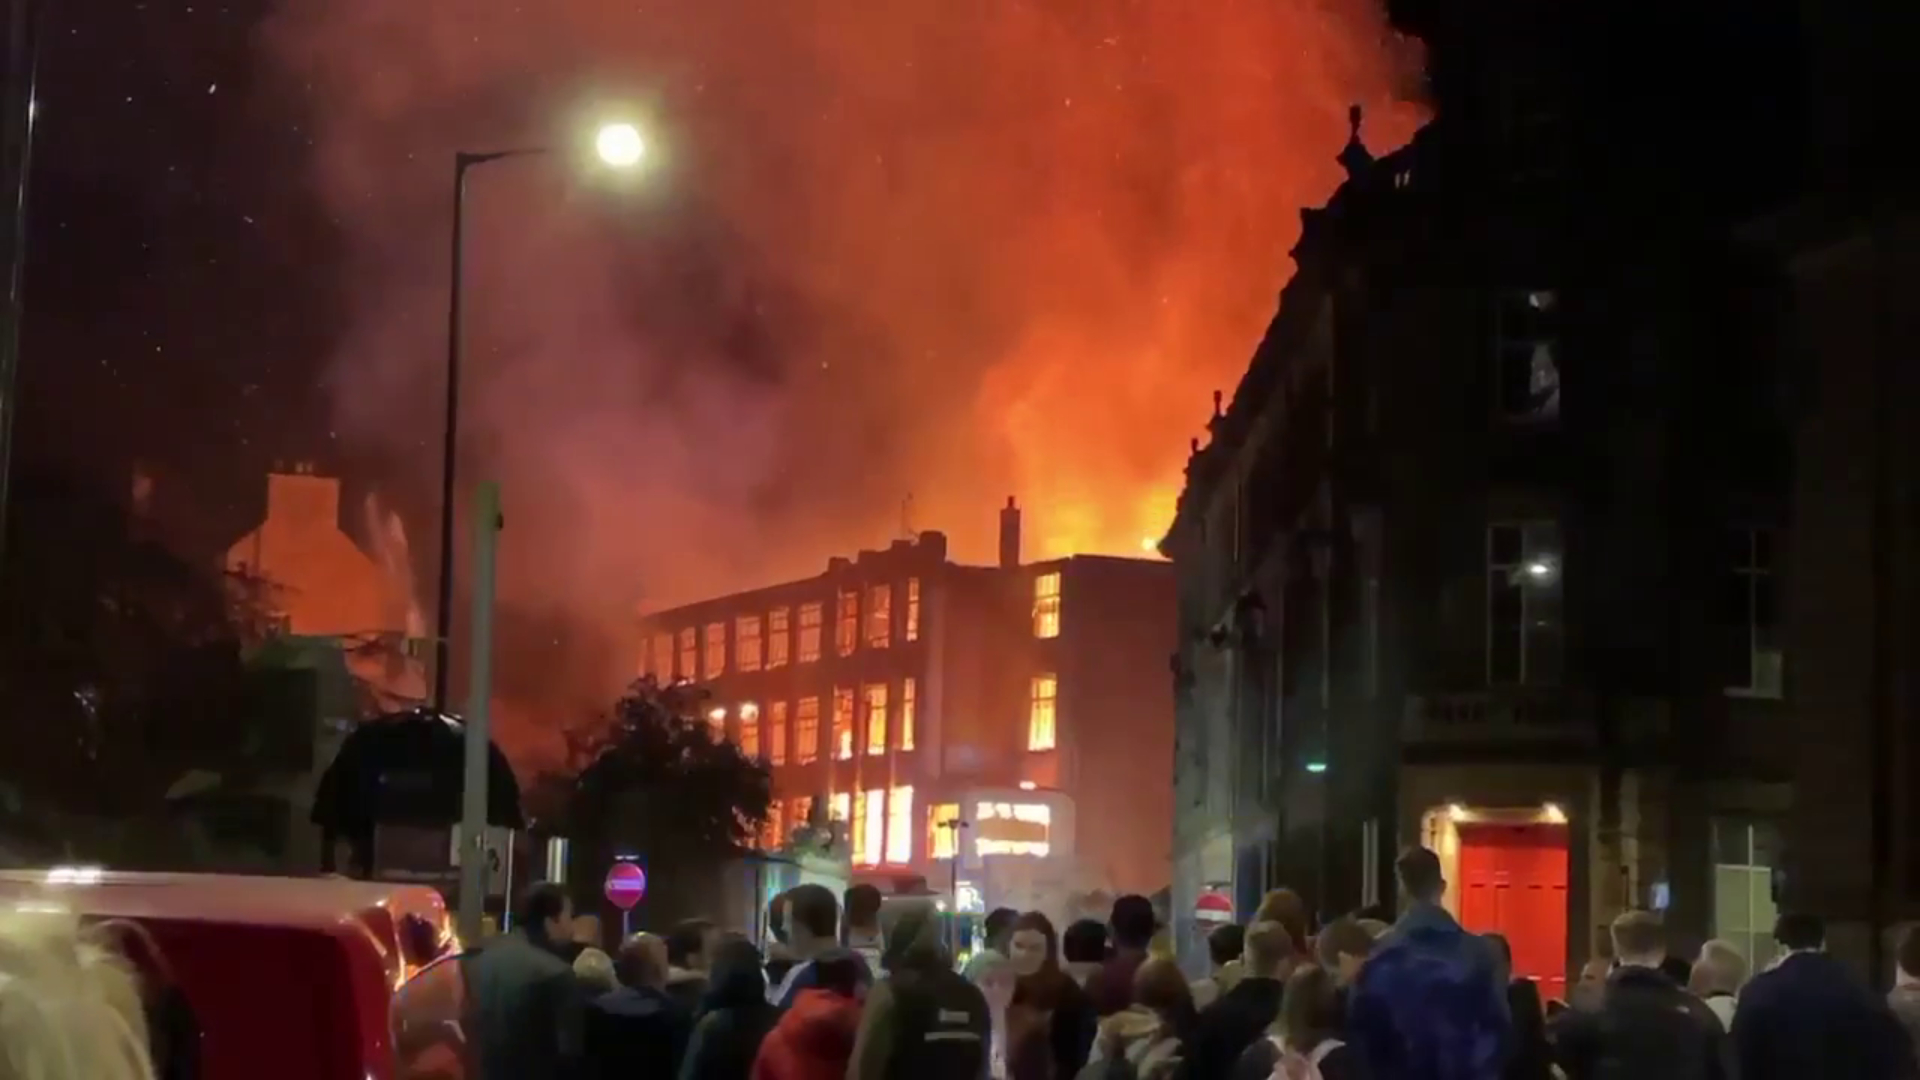 Crowds gathered to watch the fire at former Roberston's Furniture shop in Dundee